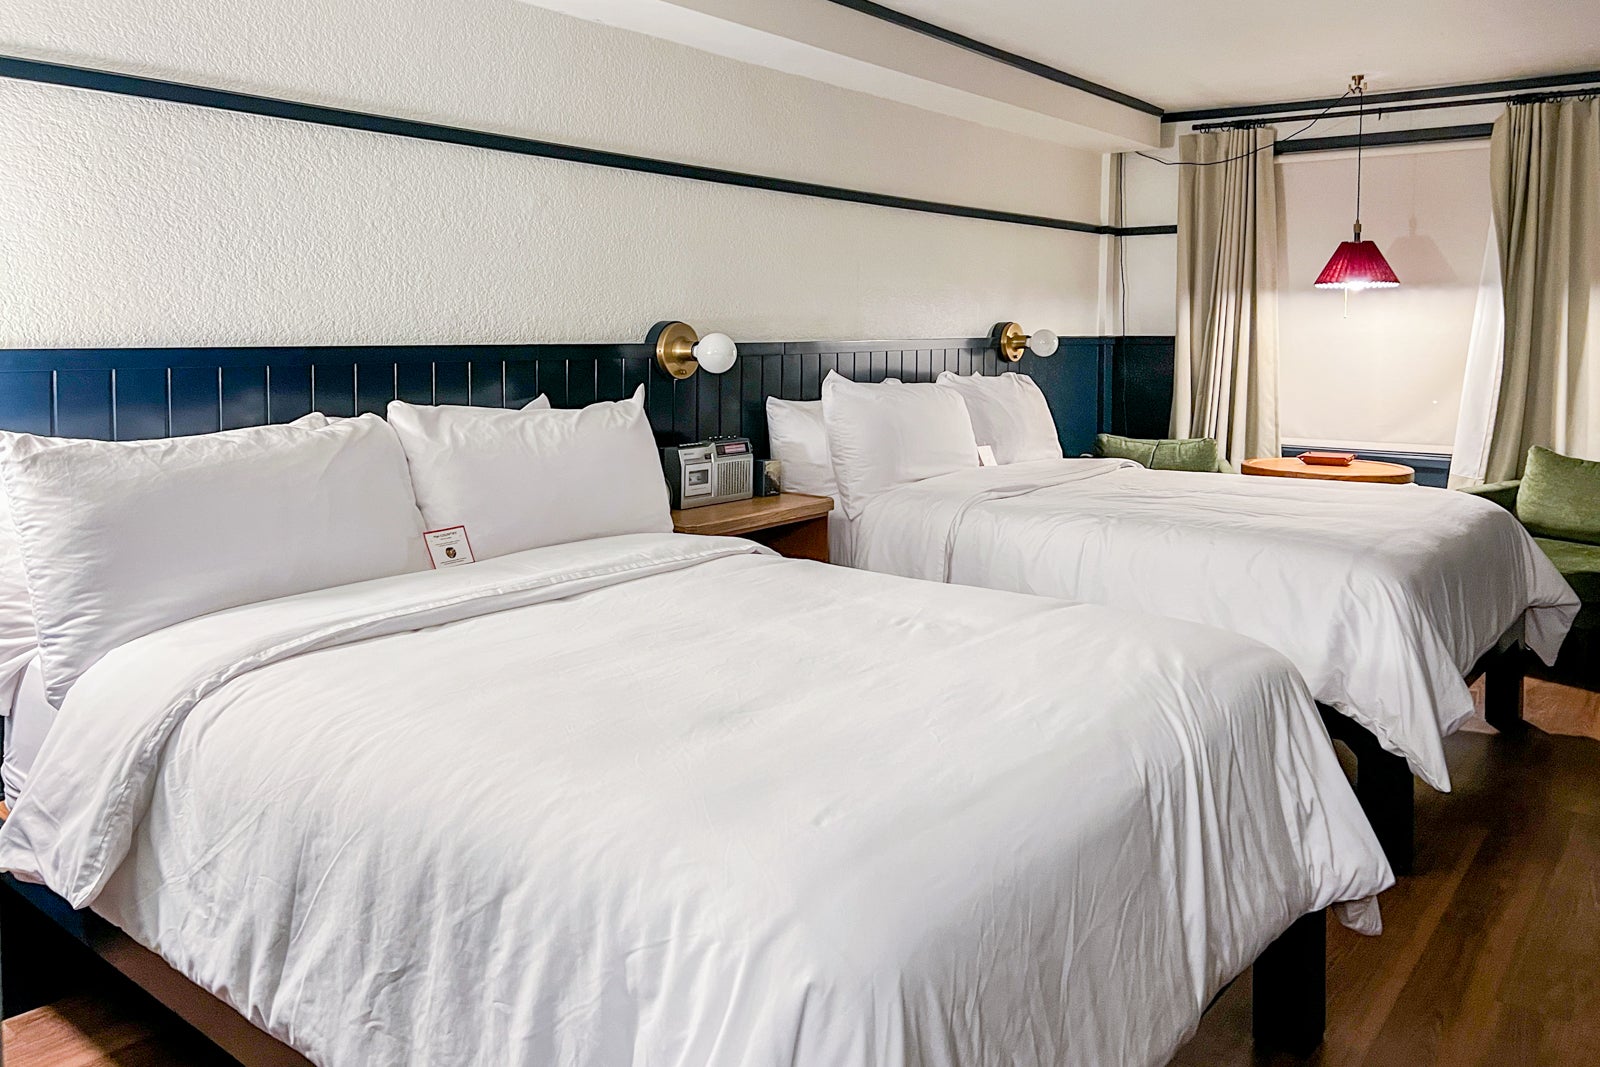 Beds with white bedding in hotel room